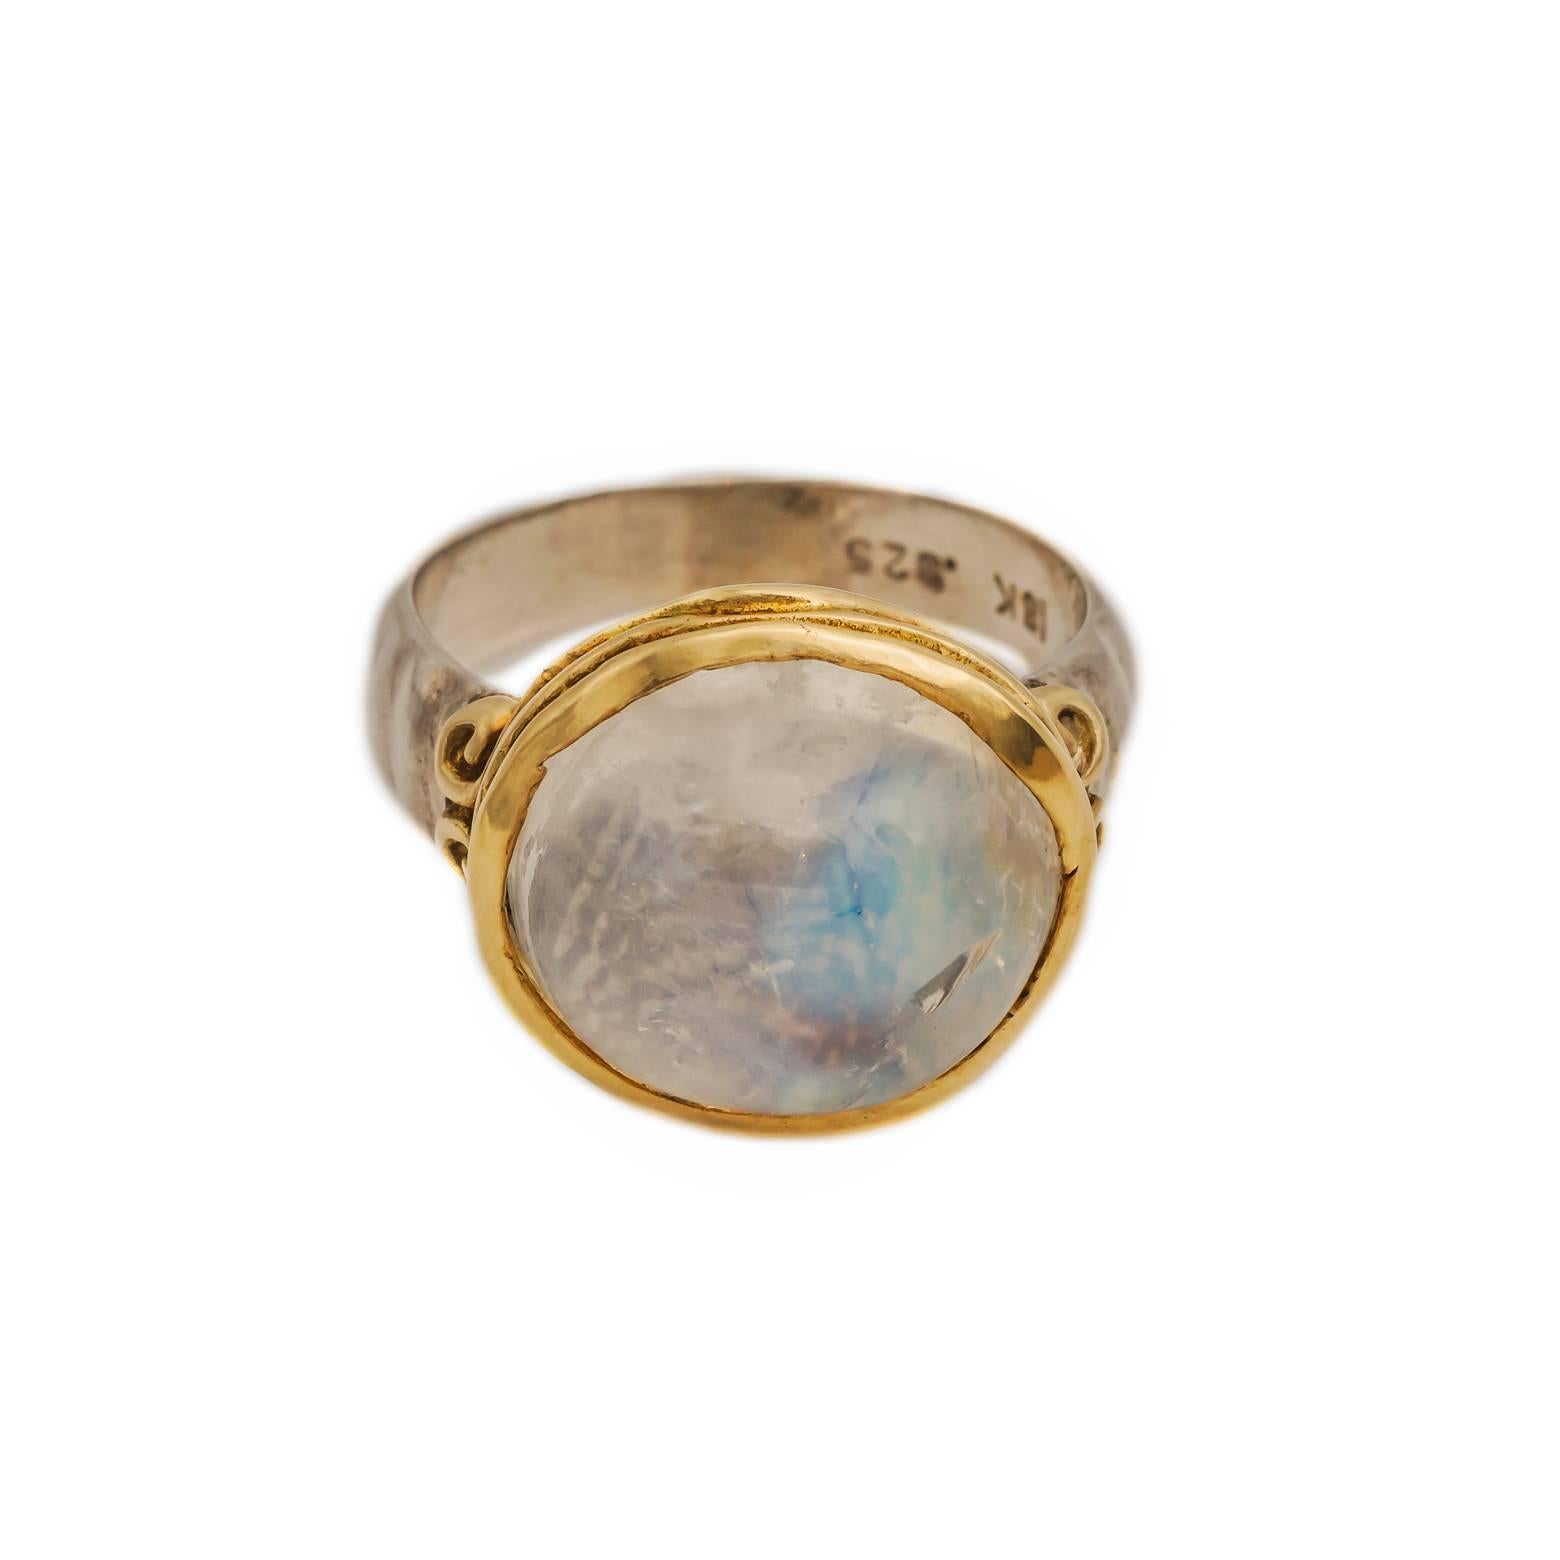 This mysterious and regal large oval 10 carat moonstone ring comes in a two-toned setting and band. The wavy 18K yellow gold bezel has two spirals on each side with a substantial satin finish band. This ring is very romantic and has an ancient